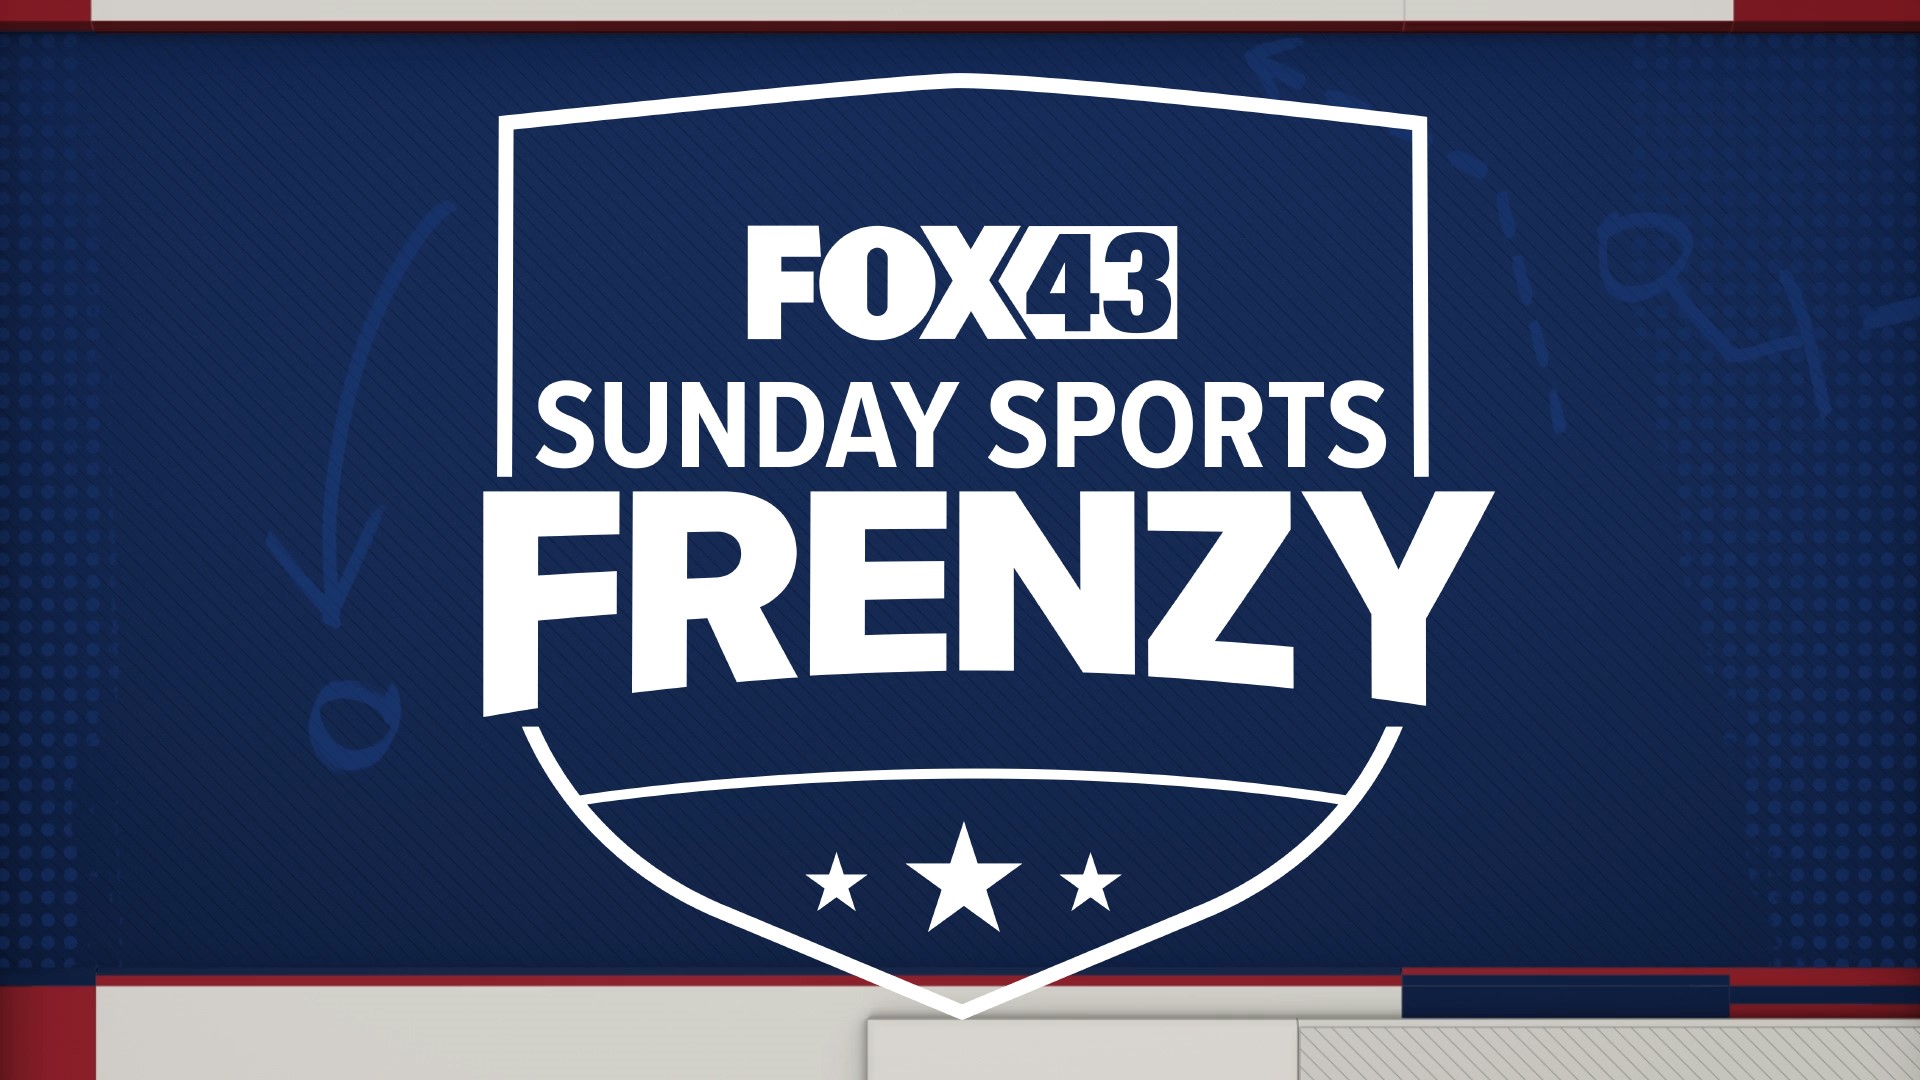 FOX43 SUNDAY SPORTS FRENZY is an all-new live program scheduled for Sunday nights at 11:00pm, immediately following FOX43 NEWS AT TEN.